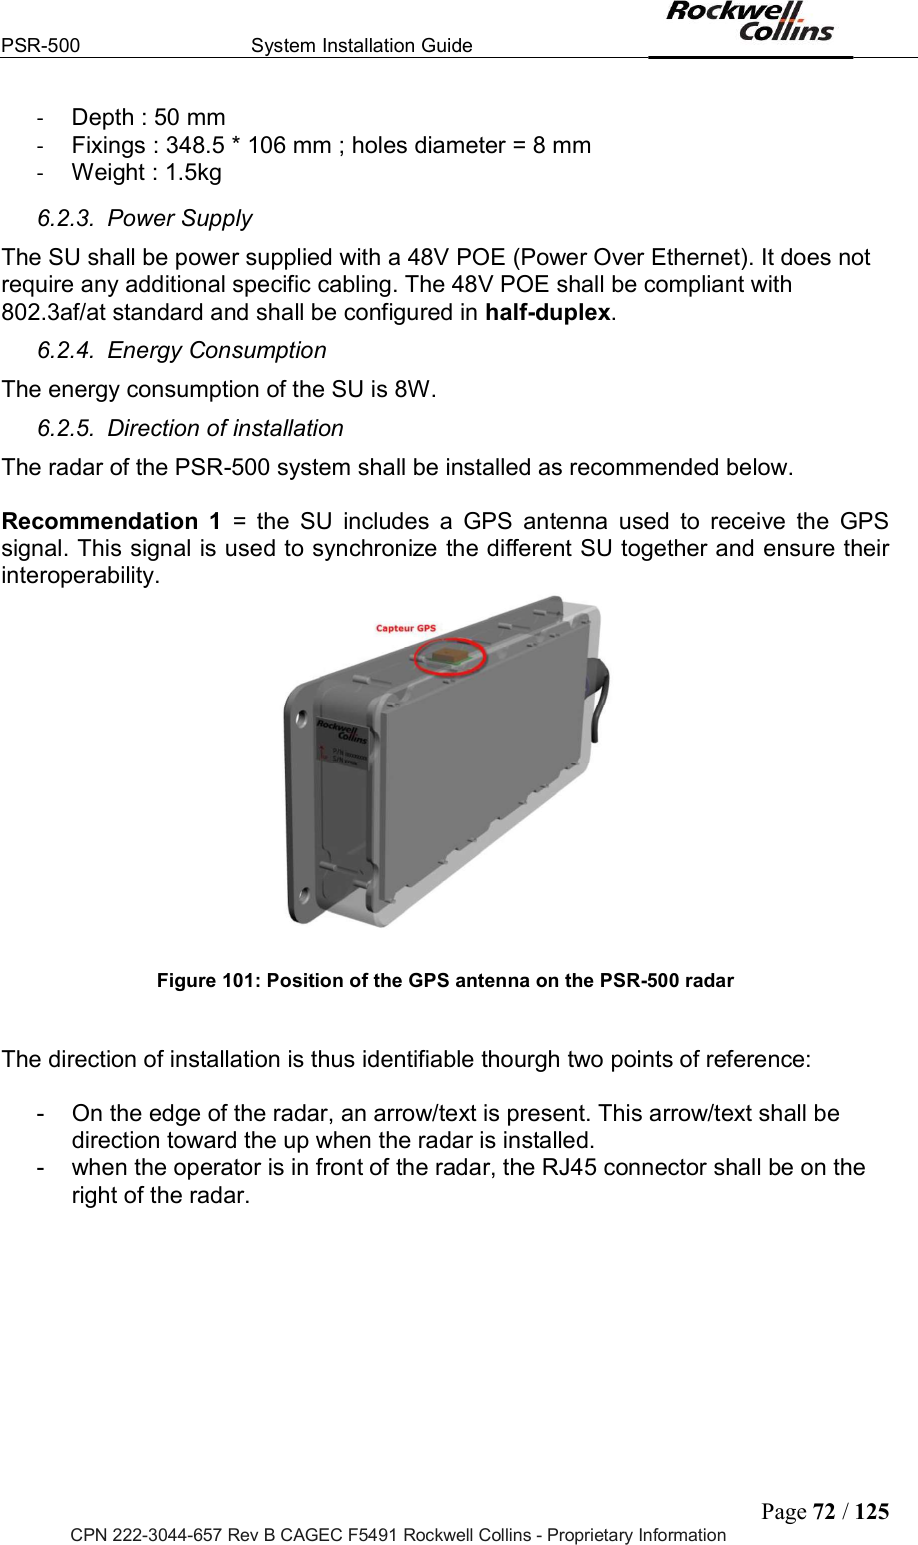 PSR-500  System Installation Guide  Page 72 / 125 CPN 222-3044-657 Rev B CAGEC F5491 Rockwell Collins - Proprietary Information -  Depth : 50 mm -  Fixings : 348.5 * 106 mm ; holes diameter = 8 mm -  Weight : 1.5kg 6.2.3.  Power Supply The SU shall be power supplied with a 48V POE (Power Over Ethernet). It does not require any additional specific cabling. The 48V POE shall be compliant with 802.3af/at standard and shall be configured in half-duplex. 6.2.4.  Energy Consumption The energy consumption of the SU is 8W. 6.2.5.  Direction of installation The radar of the PSR-500 system shall be installed as recommended below.   Recommendation  1  =  the  SU  includes  a  GPS  antenna  used  to  receive  the  GPS signal. This signal is used to synchronize the different SU together and ensure their interoperability.    Figure 101: Position of the GPS antenna on the PSR-500 radar   The direction of installation is thus identifiable thourgh two points of reference:  -  On the edge of the radar, an arrow/text is present. This arrow/text shall be direction toward the up when the radar is installed.  -  when the operator is in front of the radar, the RJ45 connector shall be on the right of the radar.  